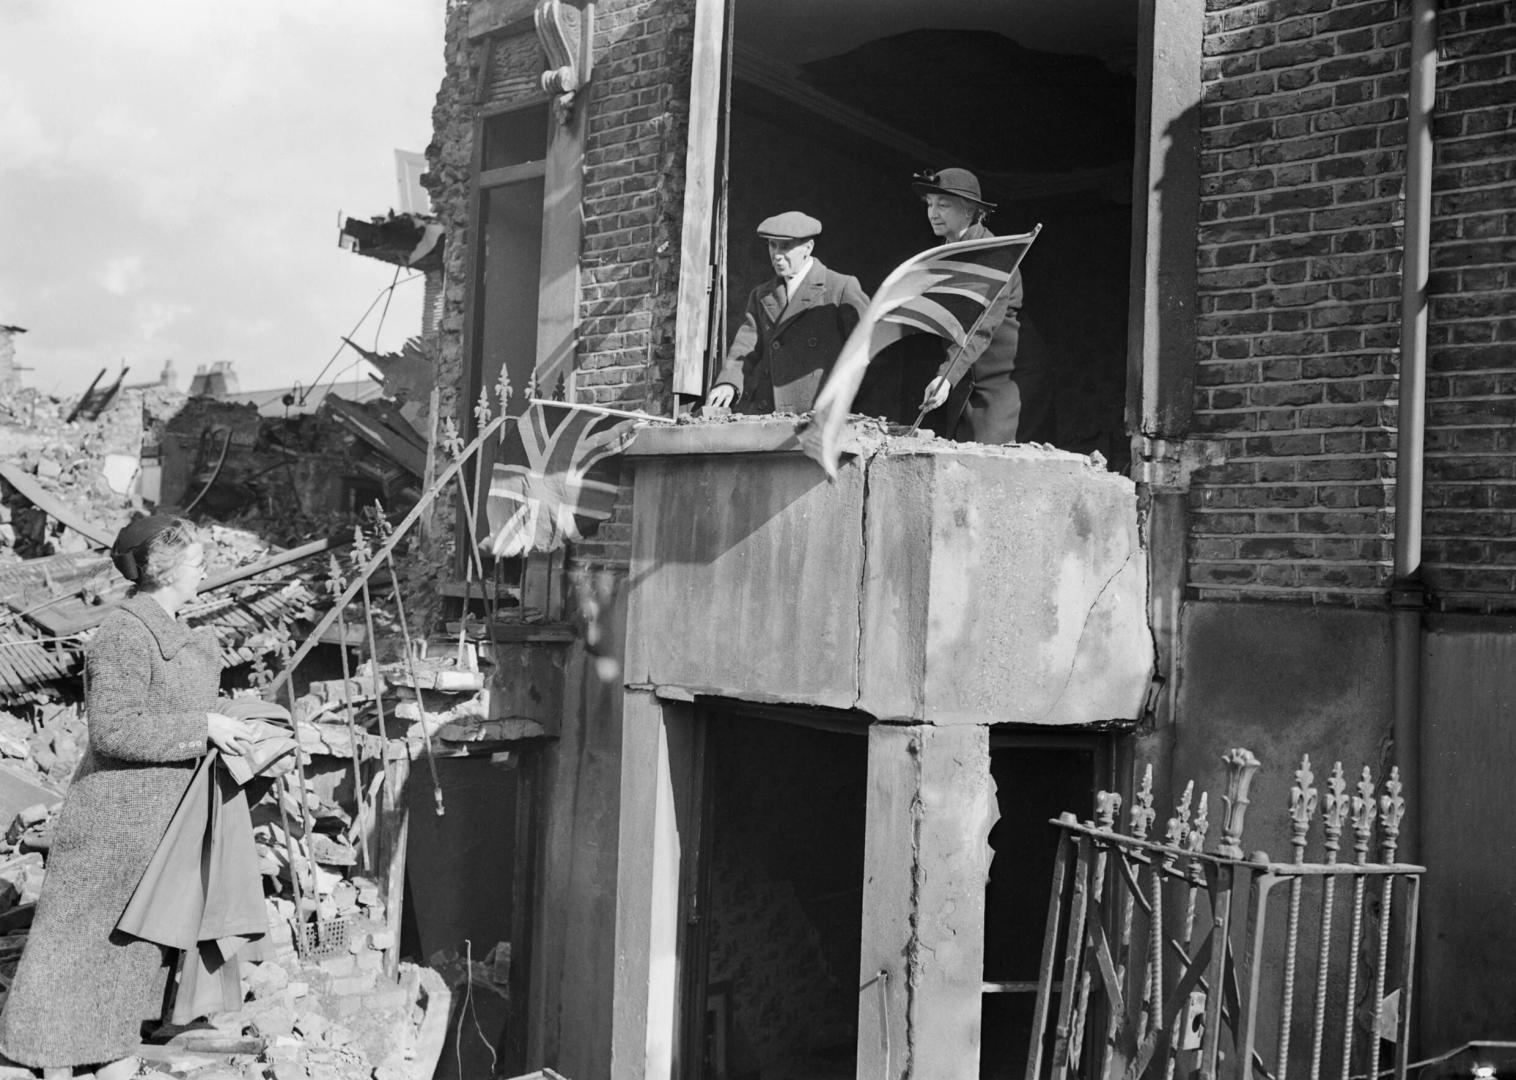 A black and white photo showing bomb damage caused to British houses with people talking and waving the Union Jack flag